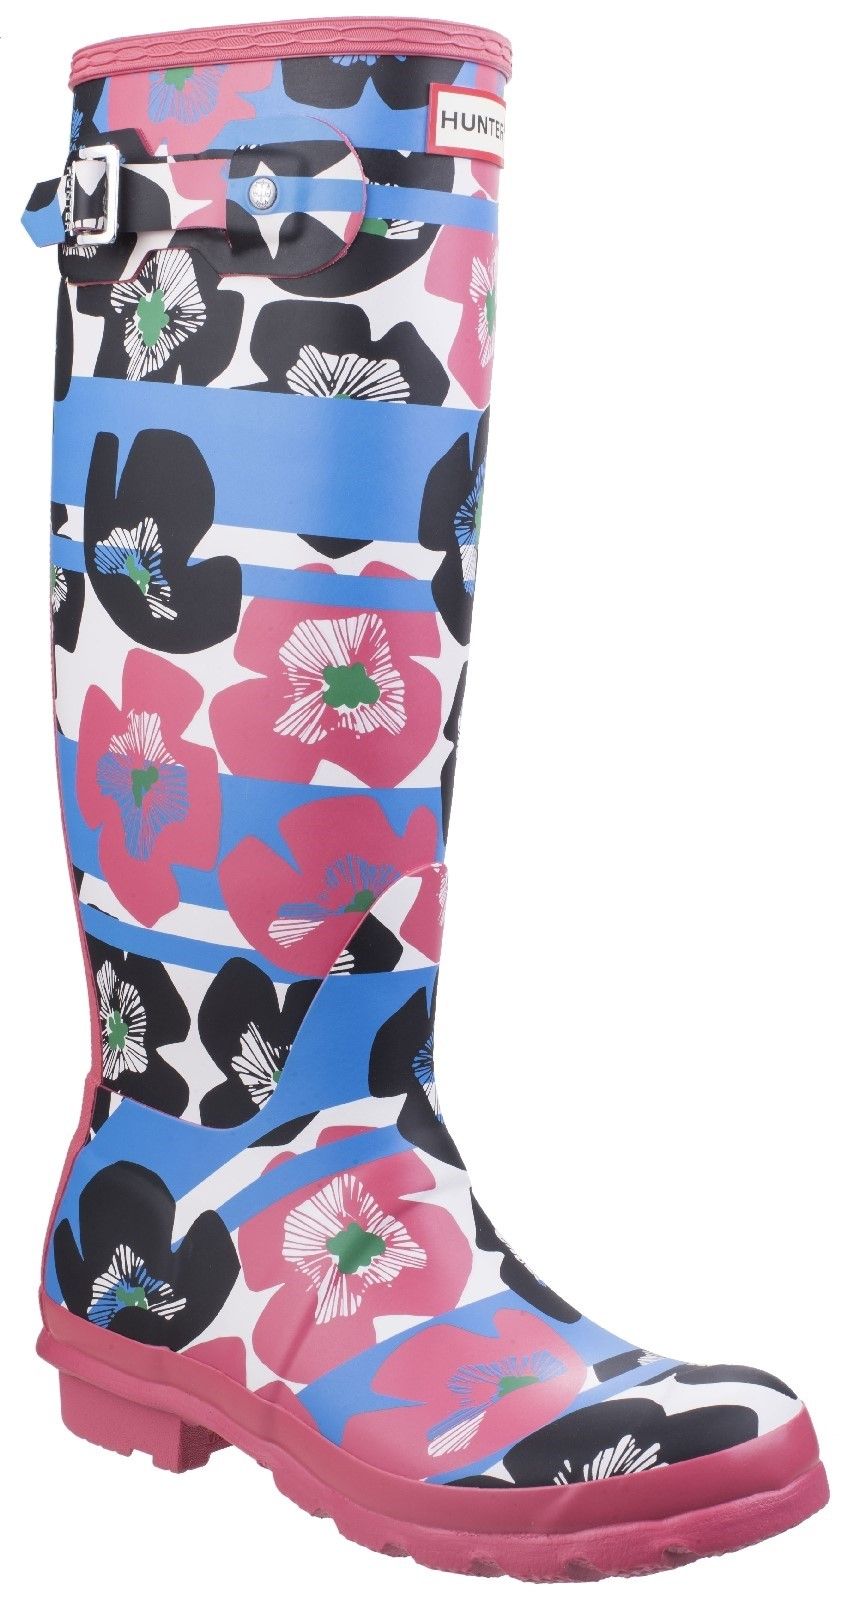 Handcrafted from 28 parts, and based on Hunter's Original Tall welly, this fully waterproof boot is globally recognised as iconic. Constructed from natural vulcanised rubber A bold floral and stripe print celebrating Hunter's longstanding affiliation with the garden Fun and practical wellington Features a polyester lining and non slip rubber sole